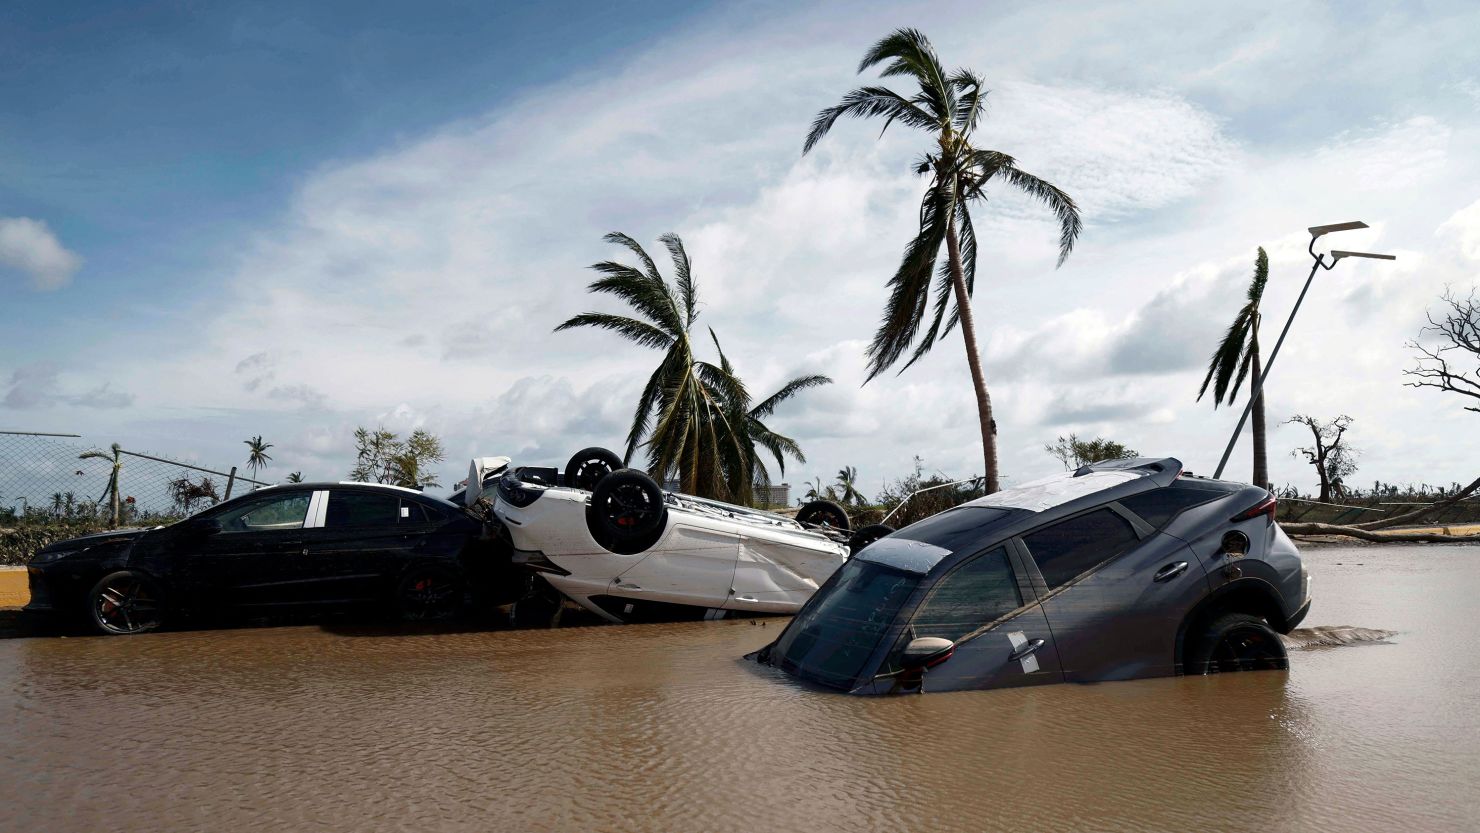 TOPSHOT - Cars lay partially under water in the aftermath of hurricane Otis at "Zona Diamante" in Acapulco, Guerrero State, Mexico, on October 27, 2023. Airlines began to evacuate tourists from Mexico's beachside city of Acapulco on Friday after a scale-topping Category 5 hurricane left a trail of destruction and at least 27 people dead, authorities said on October 27, 2023. (Photo by RODRIGO OROPEZA / AFP) (Photo by RODRIGO OROPEZA/AFP via Getty Images)